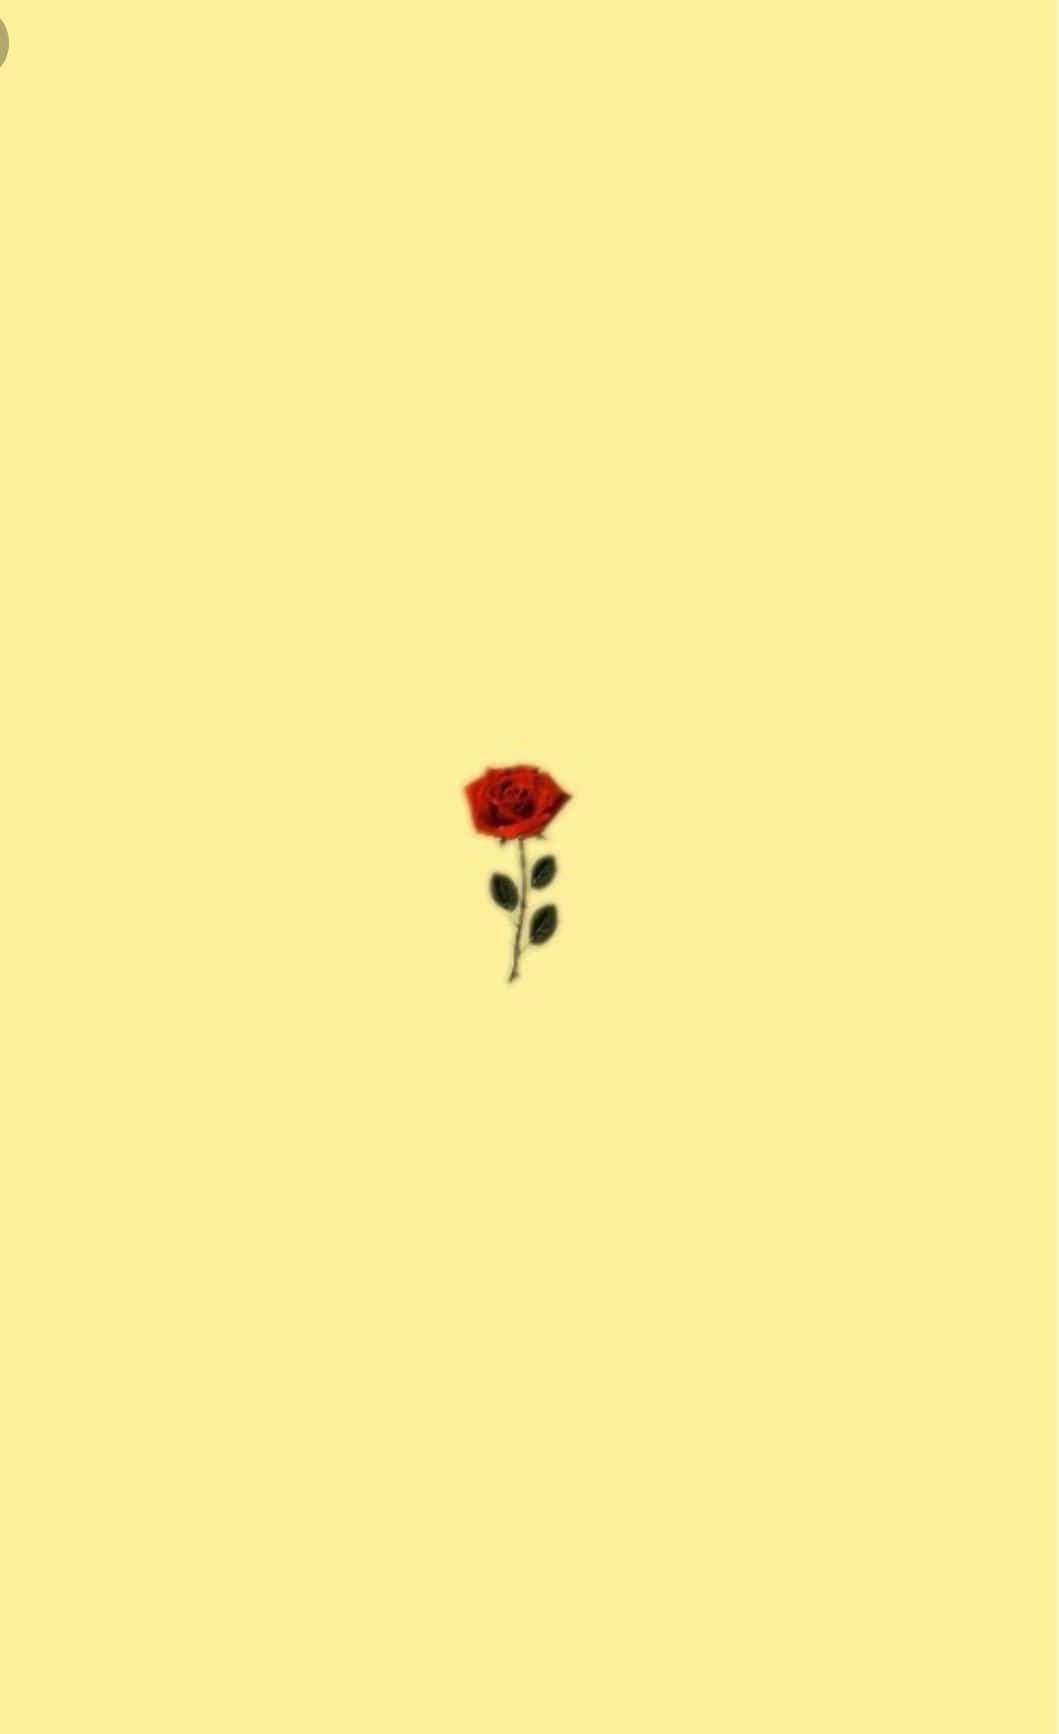 A Single Red Rose On A Yellow Background Wallpaper